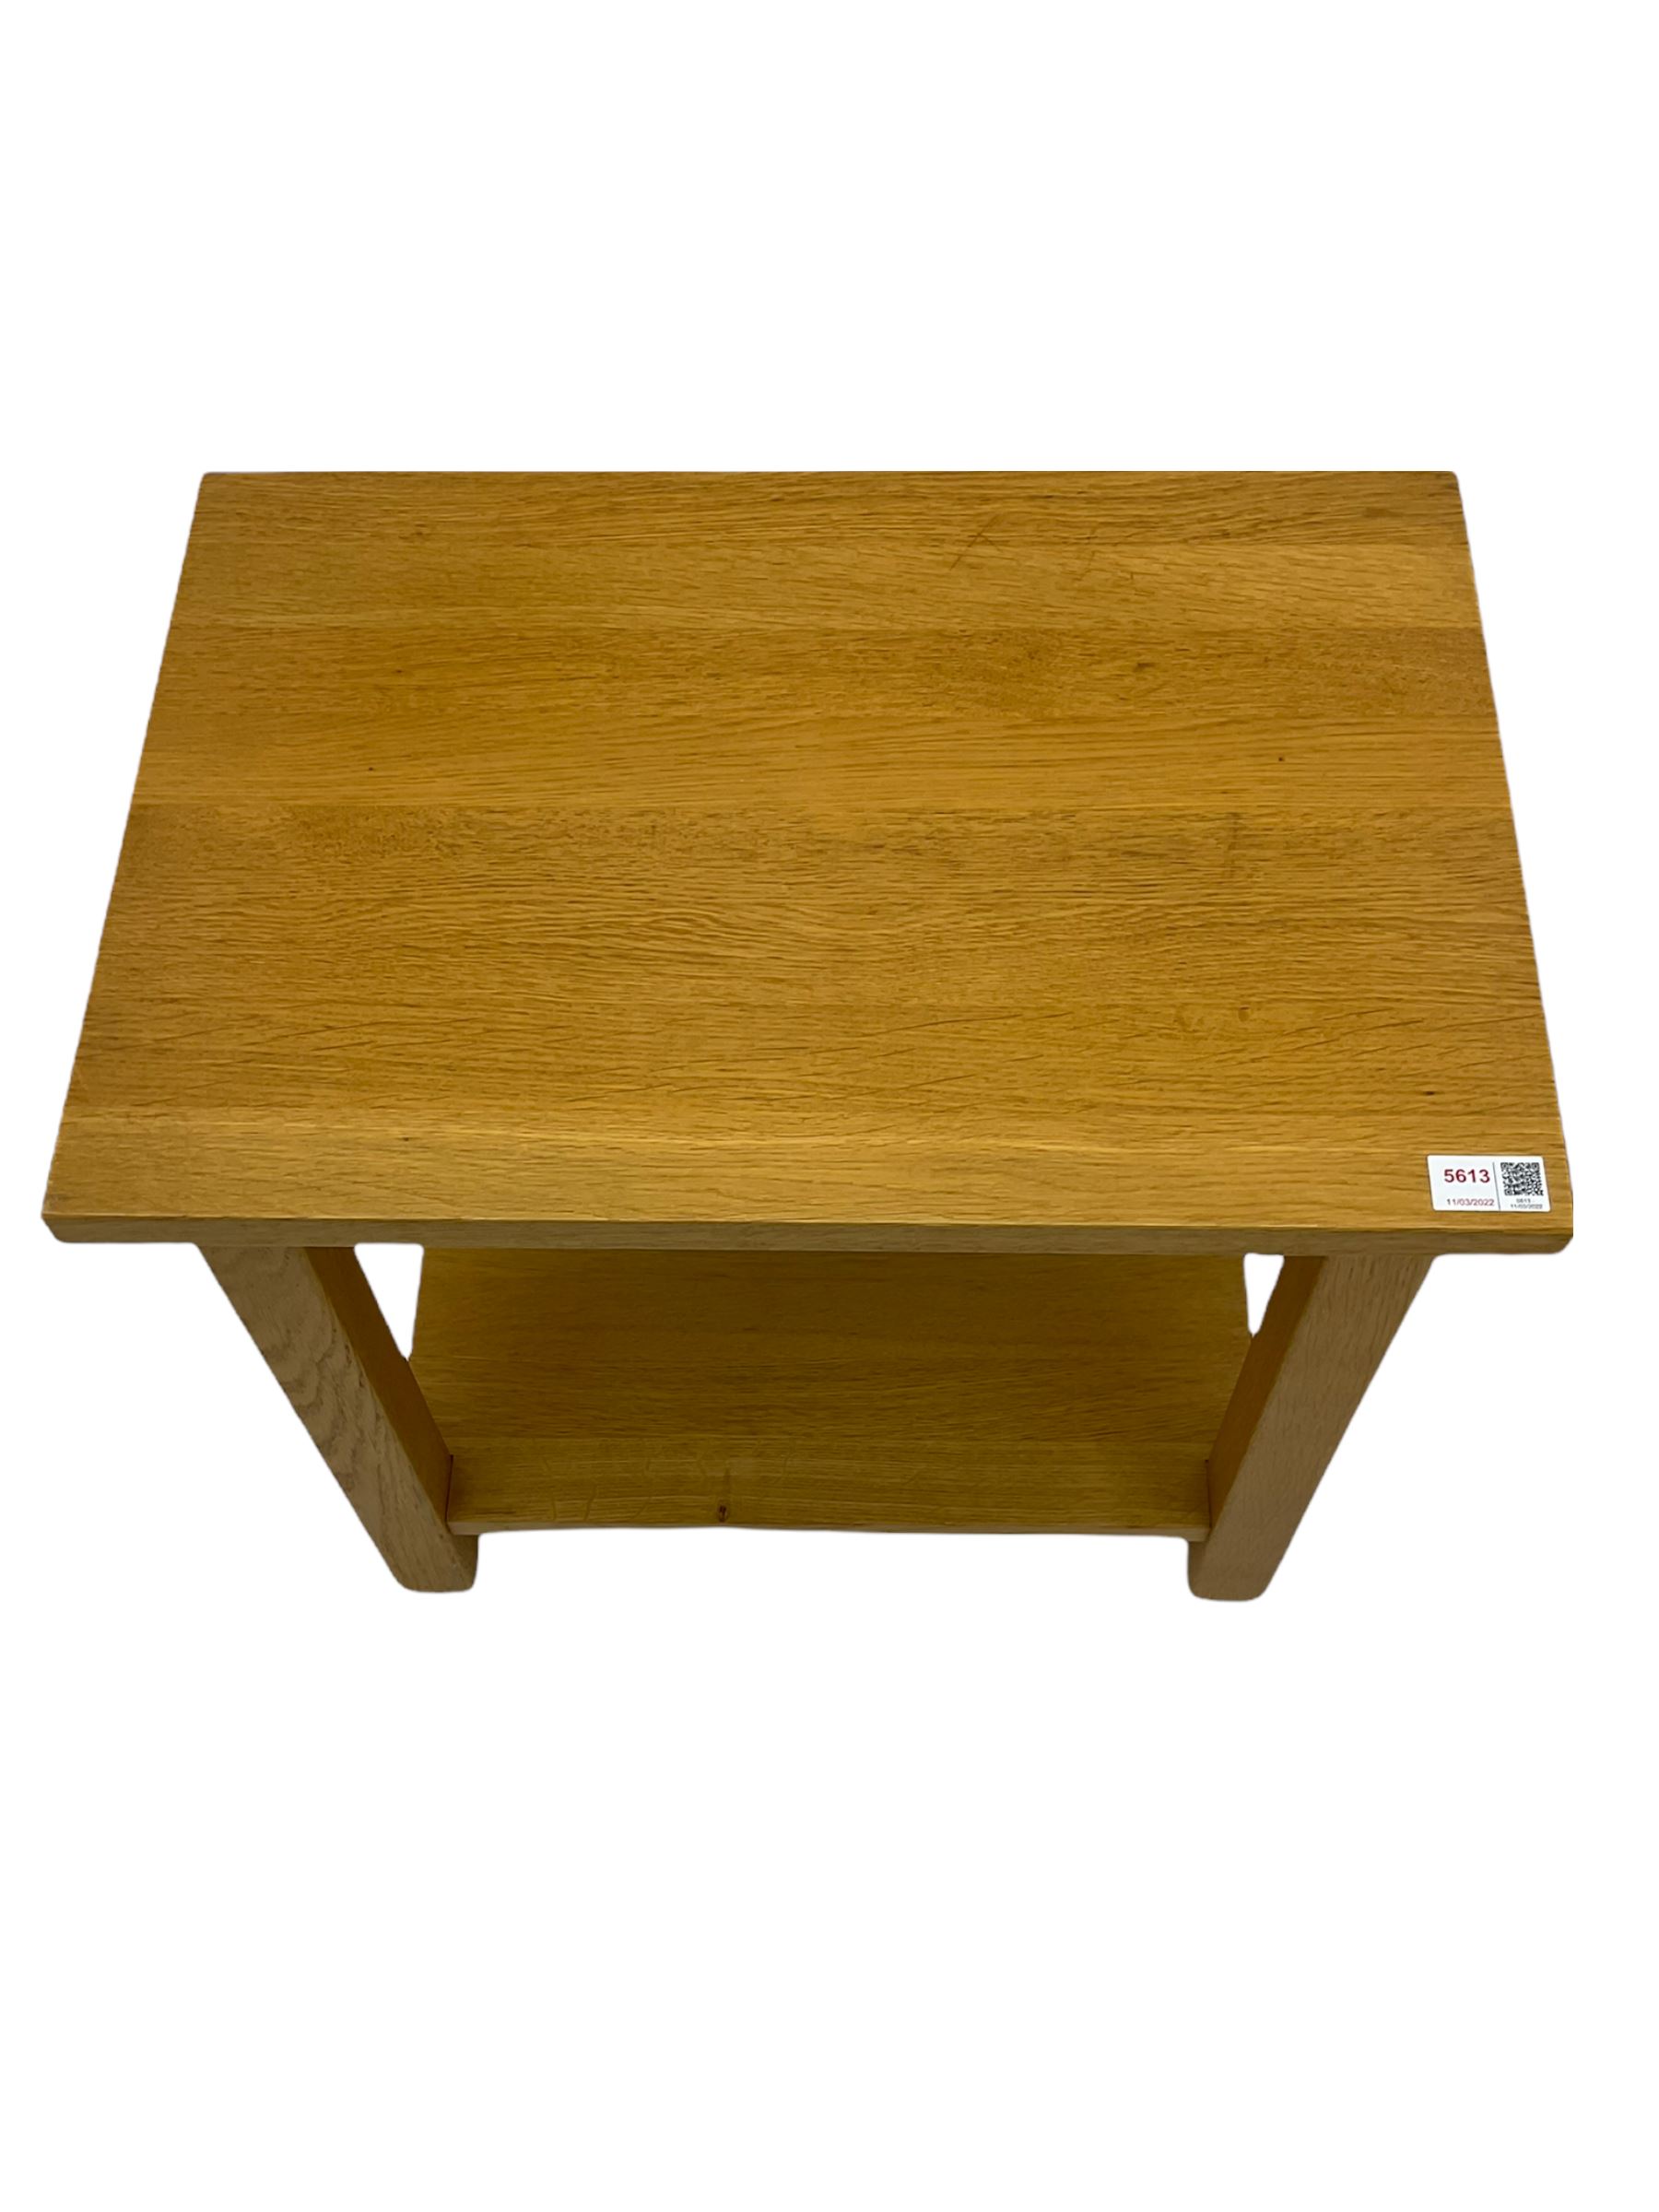 Oak two tier lamp table - Image 4 of 7